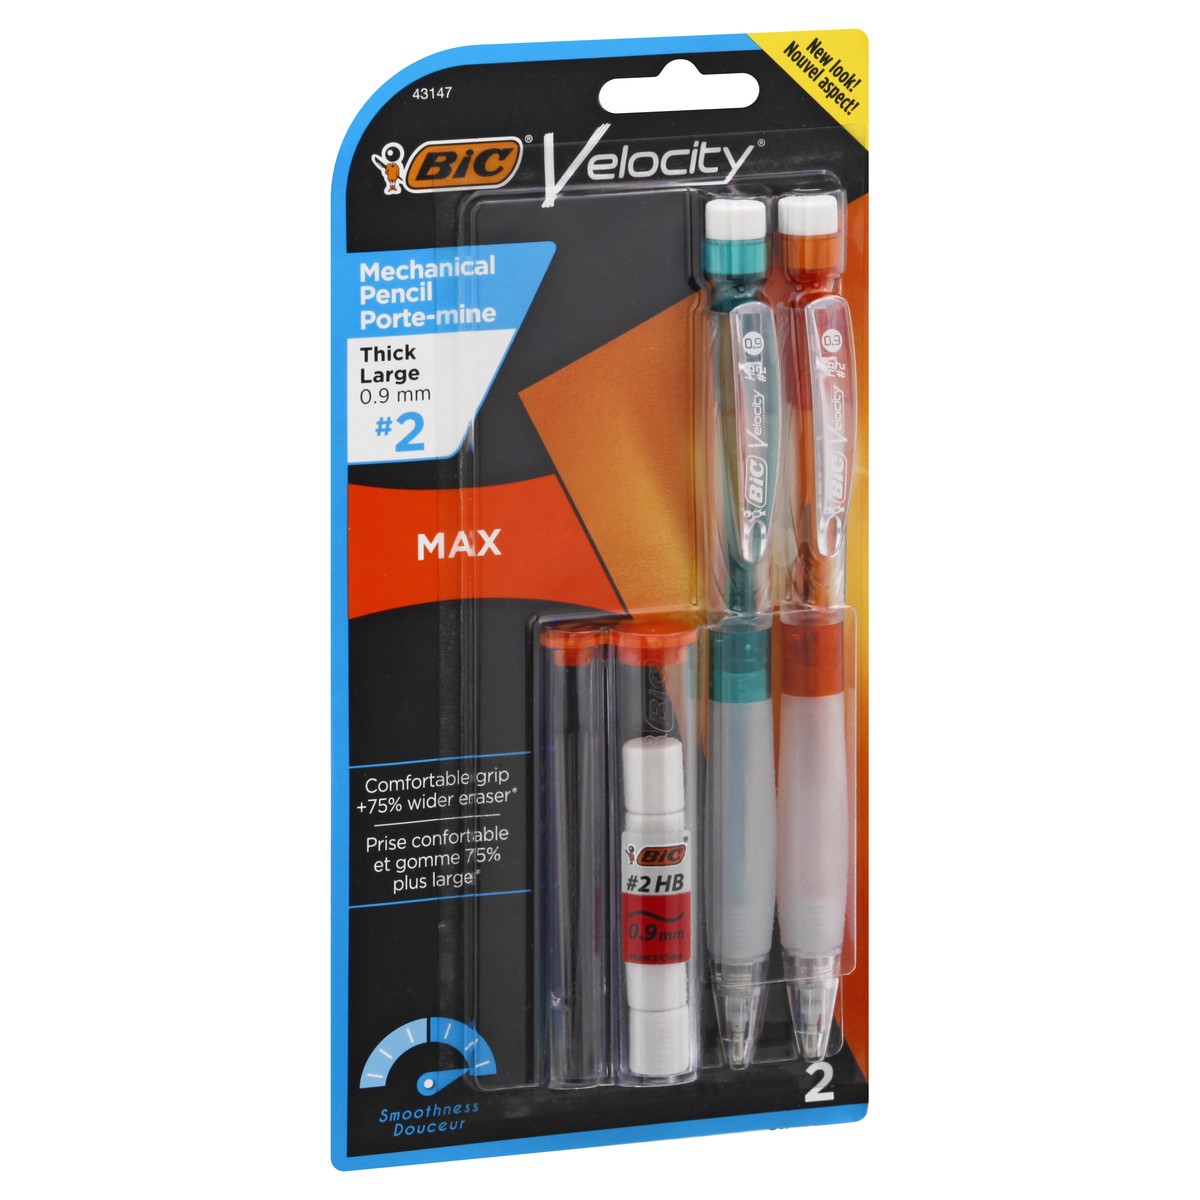 slide 9 of 9, Bic Velocity Mechanical Pencil 0.9 Mm - 2 Count, 2 ct